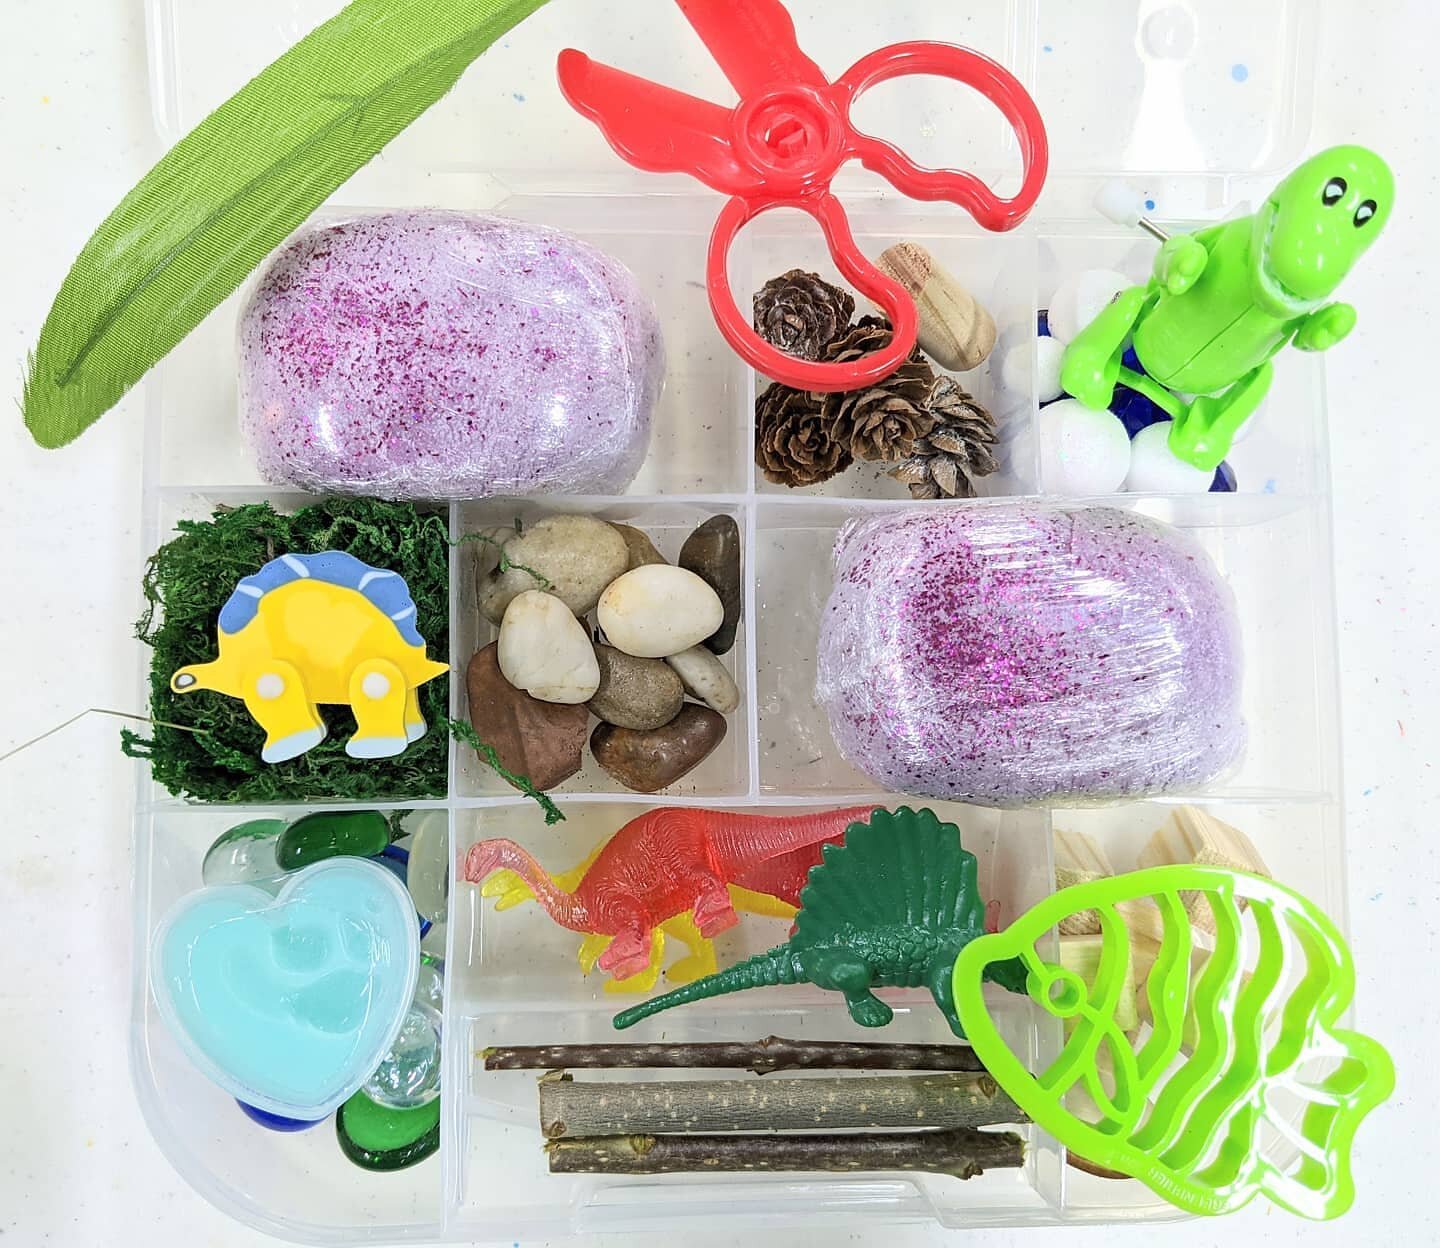 New !! DINO KITS !!! 🦕🦕🦕
.
Playdough Sensory Kits are great for fine motor skills.  They also provide great quiet time and calming activities.  Not to mention it let's Mom have a some time to make dinner !! 😂 
.
Keep the playdough in a sealed pla